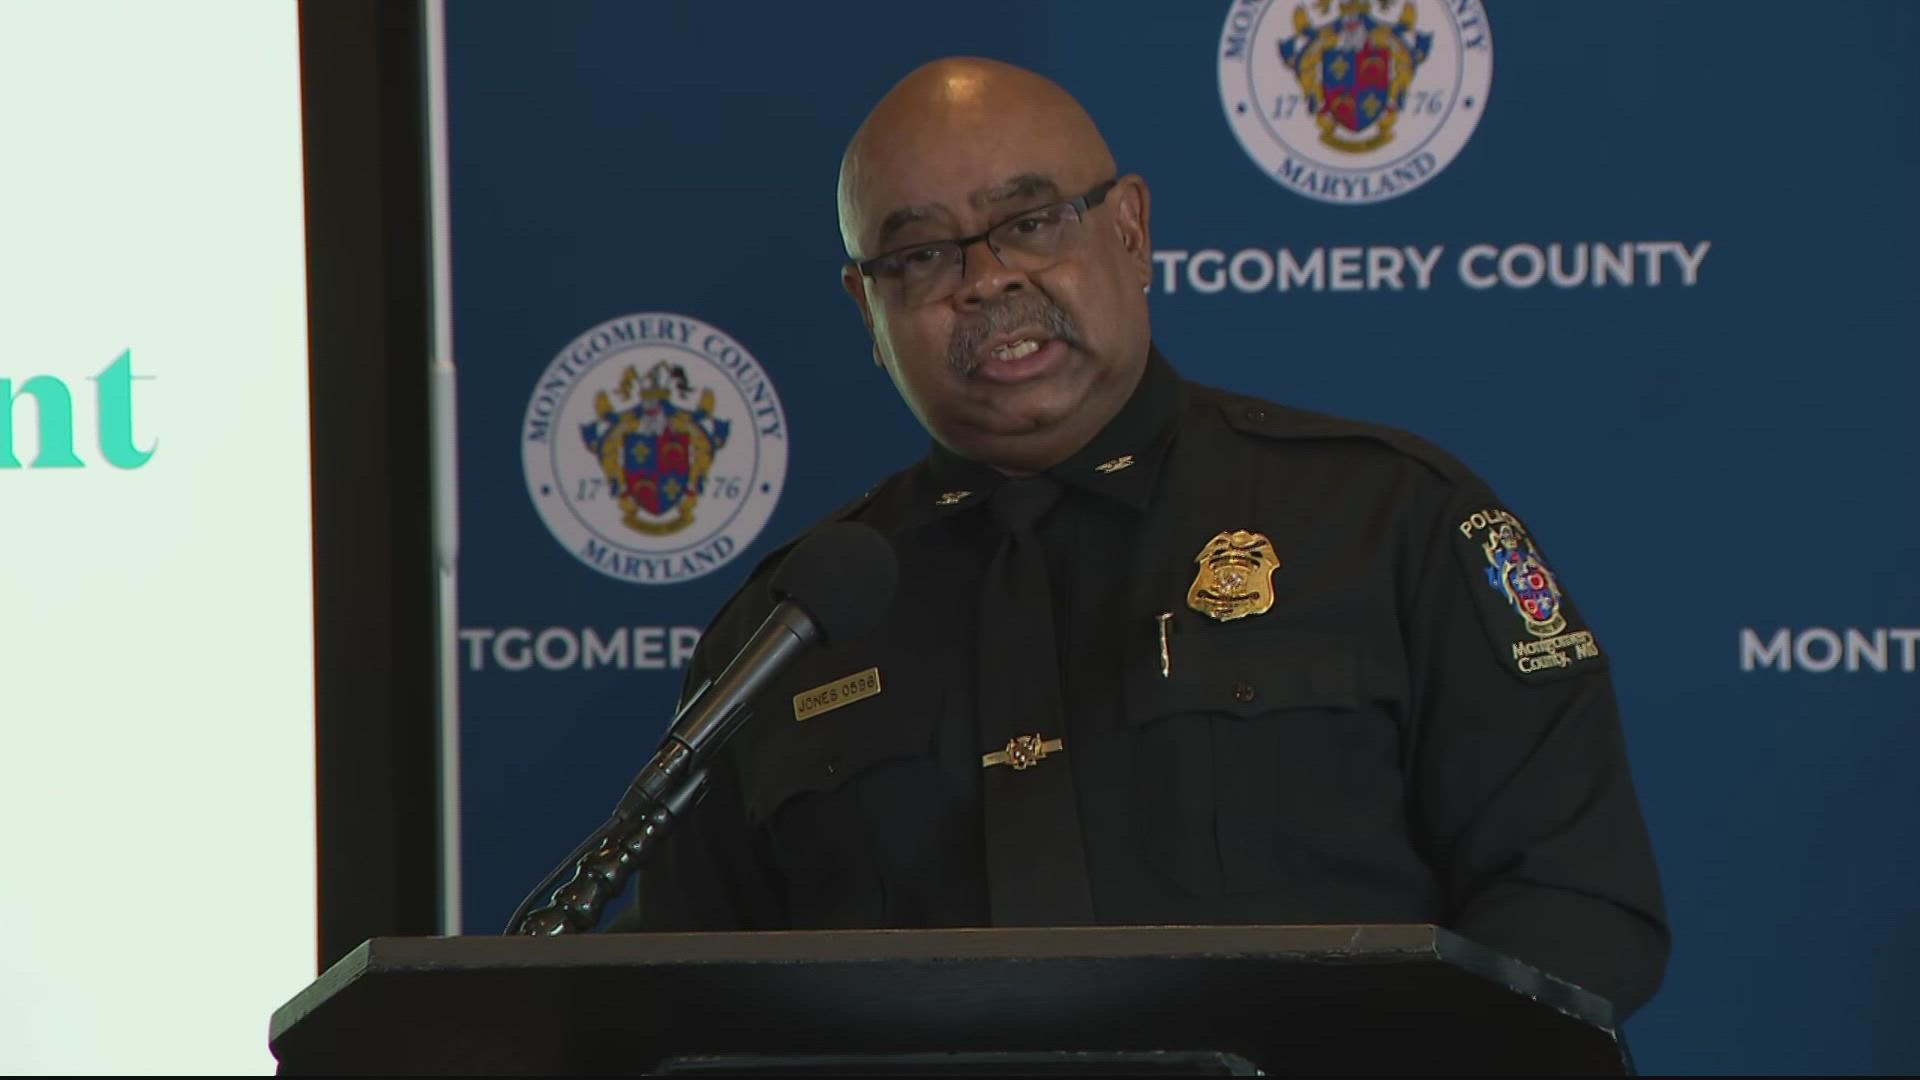 A major announcement from the Montgomery County Police Department about changes to the way they train their officers - and - how they take care of them.